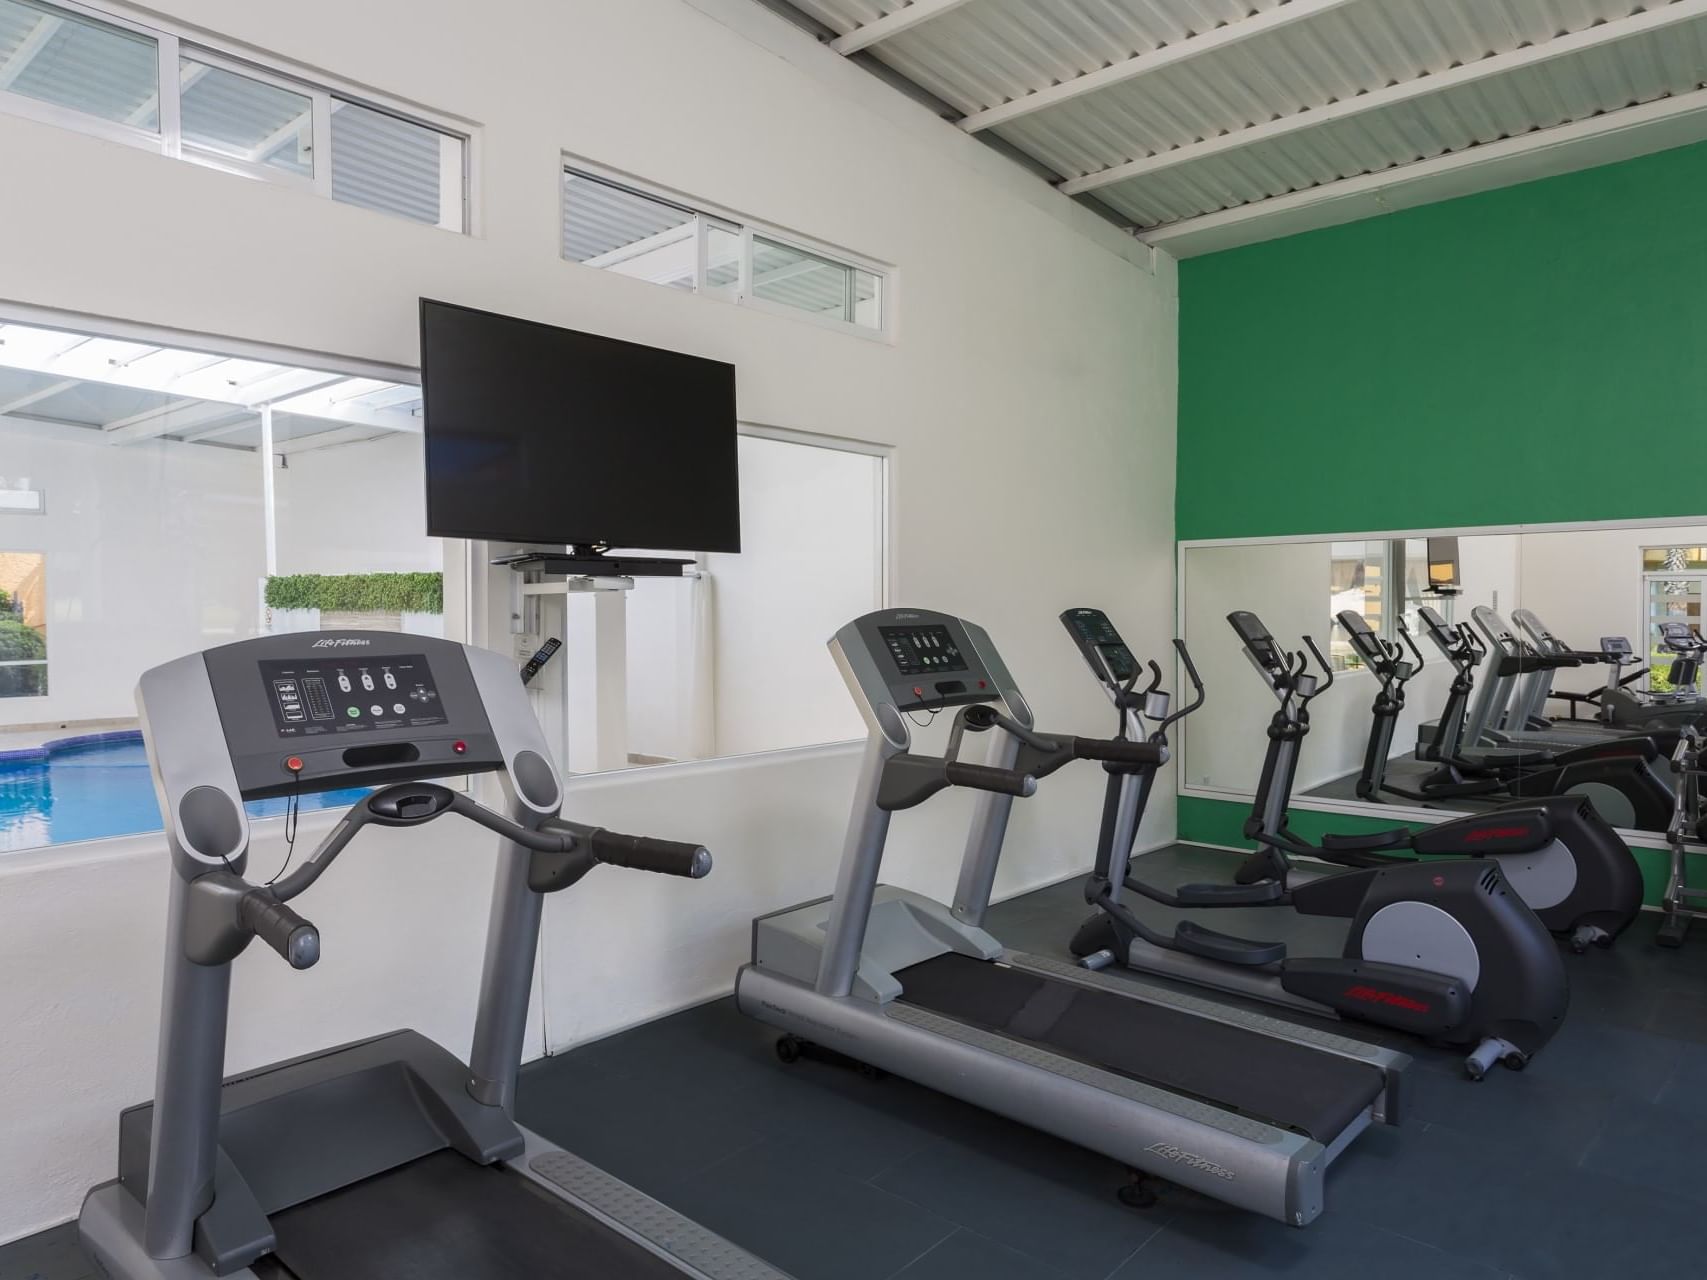 Treadmills, fitness training machines & TV in the gym at Hotel Gamma Pachuca